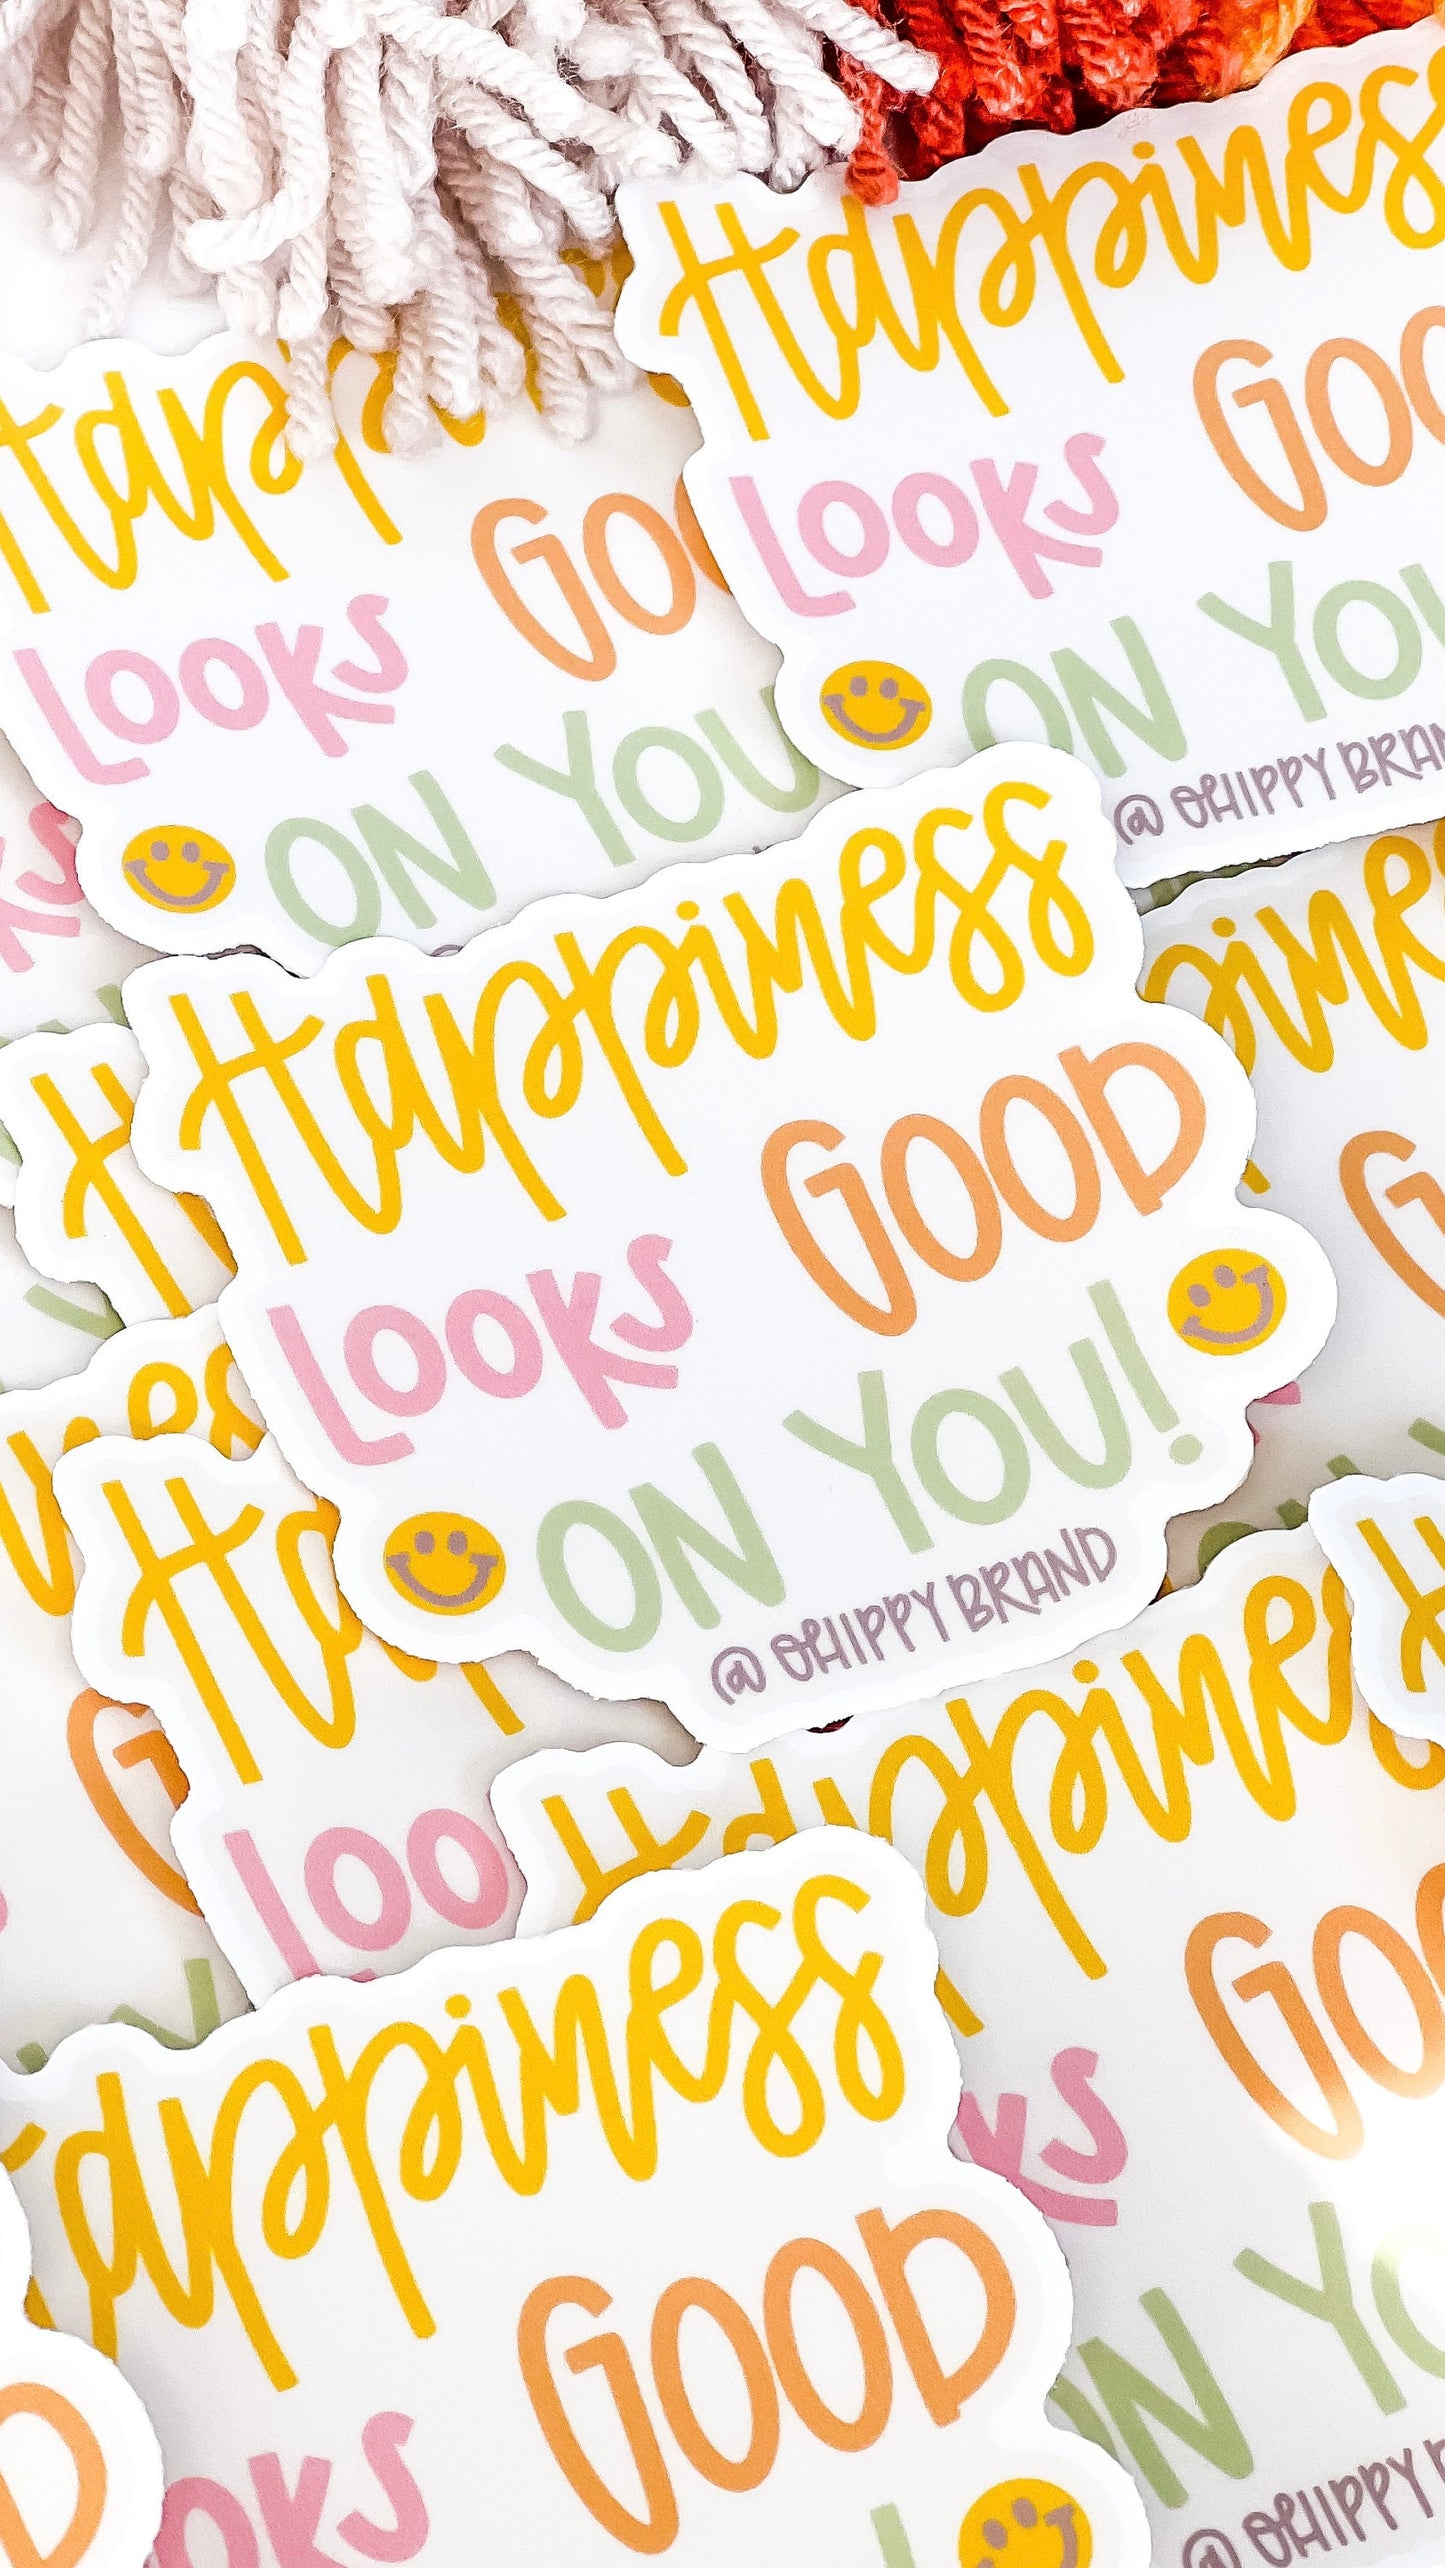 happiness looks good on you sticker, hippie sticker, good vibes sticker, retro sticker.